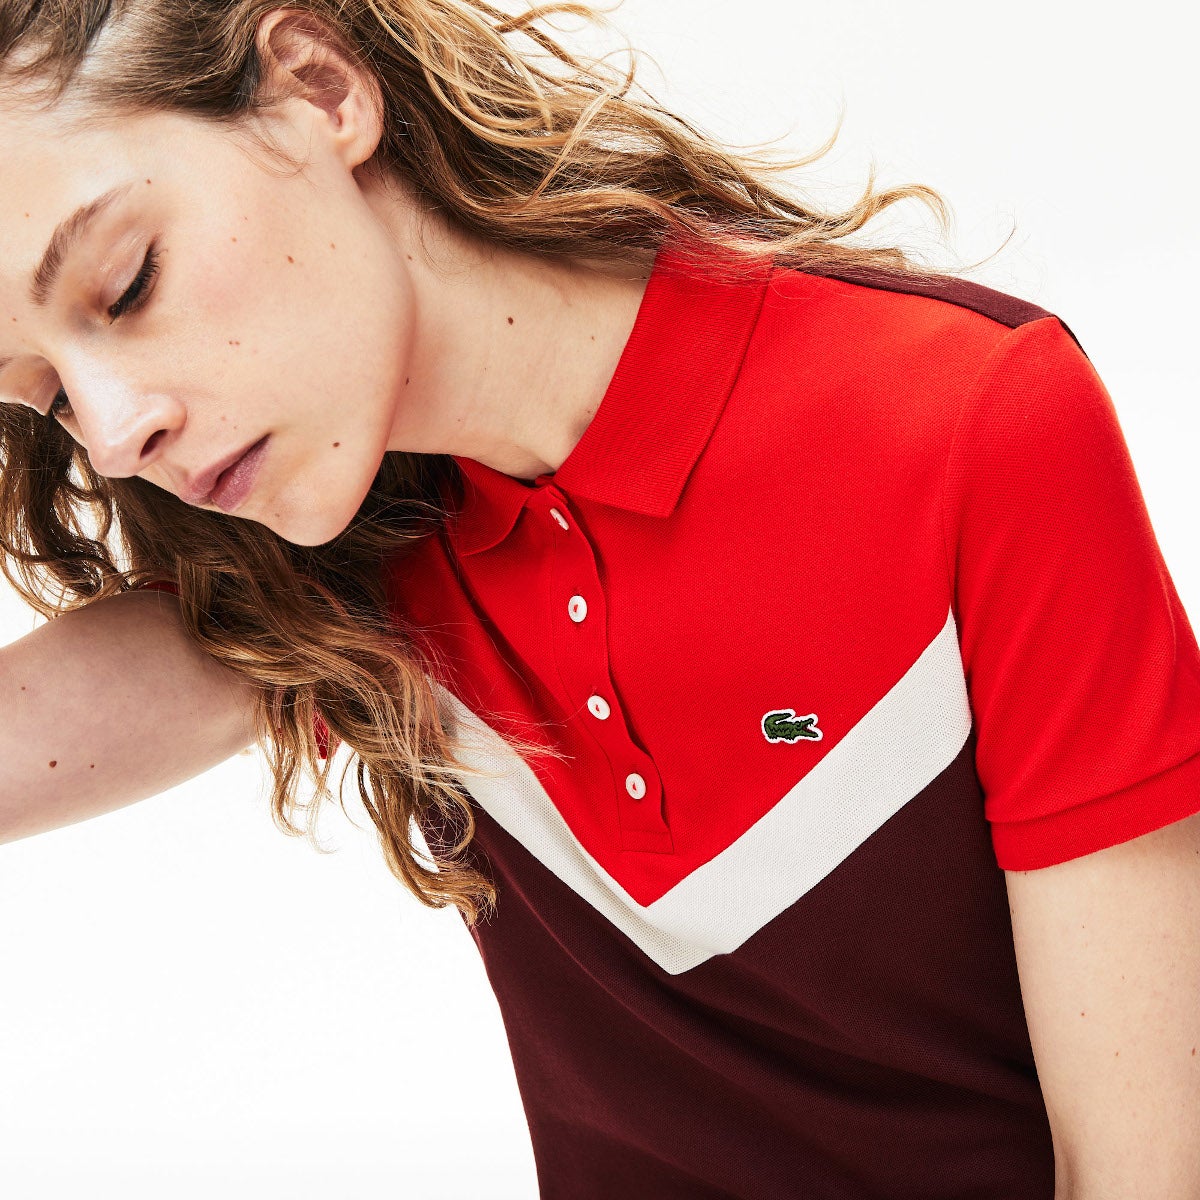 lacoste women's polo shirts on sale